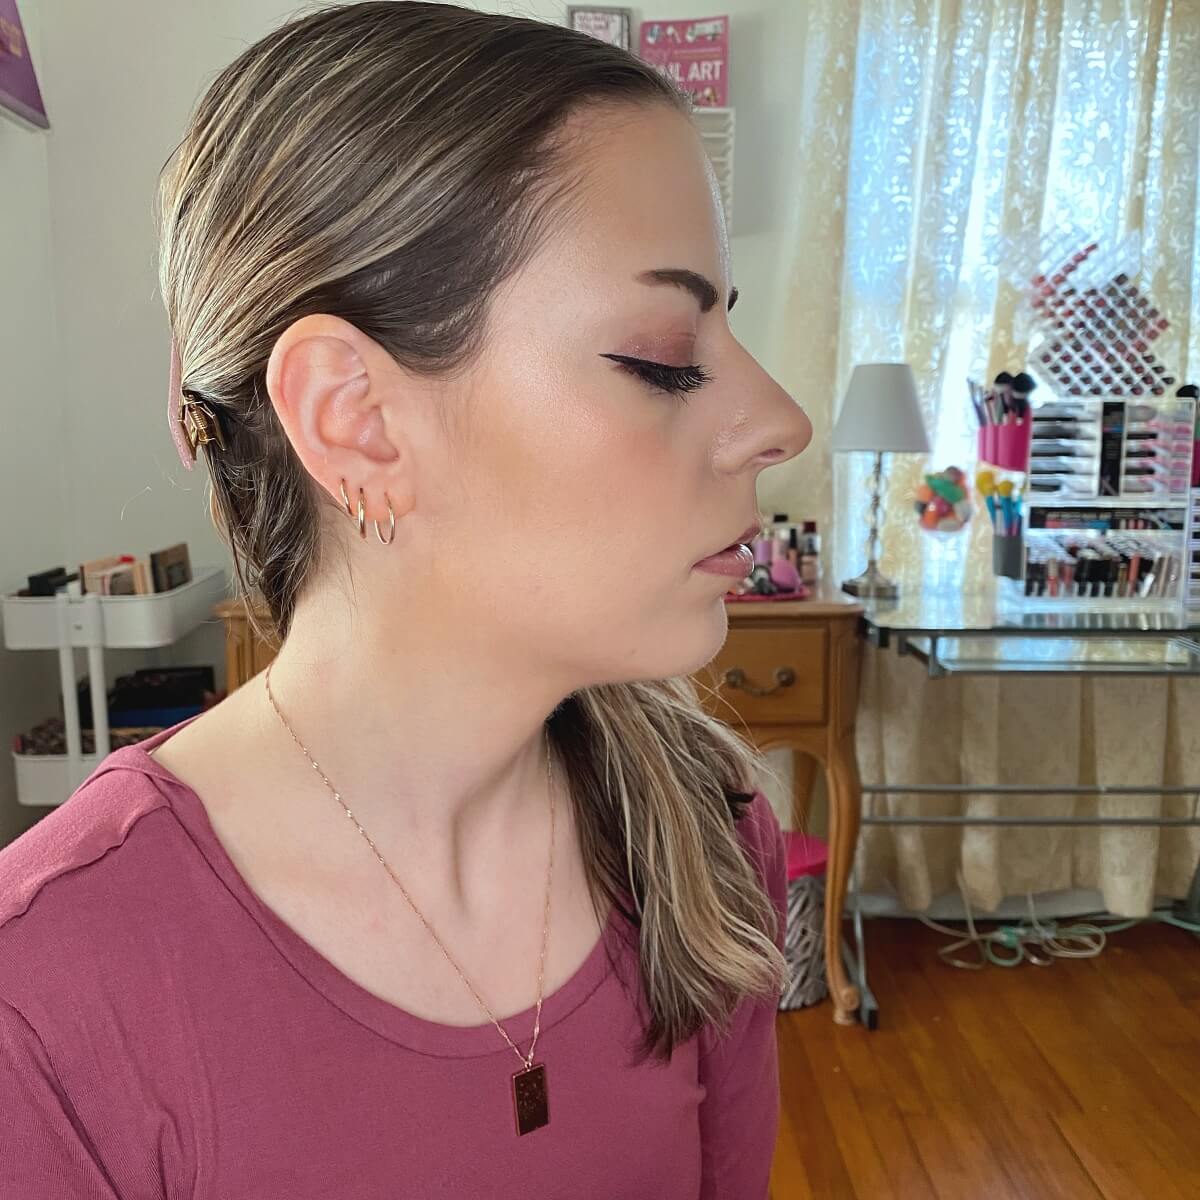 haus labs Glam Attack Liquid Shimmer Powder in Rose B-tch look